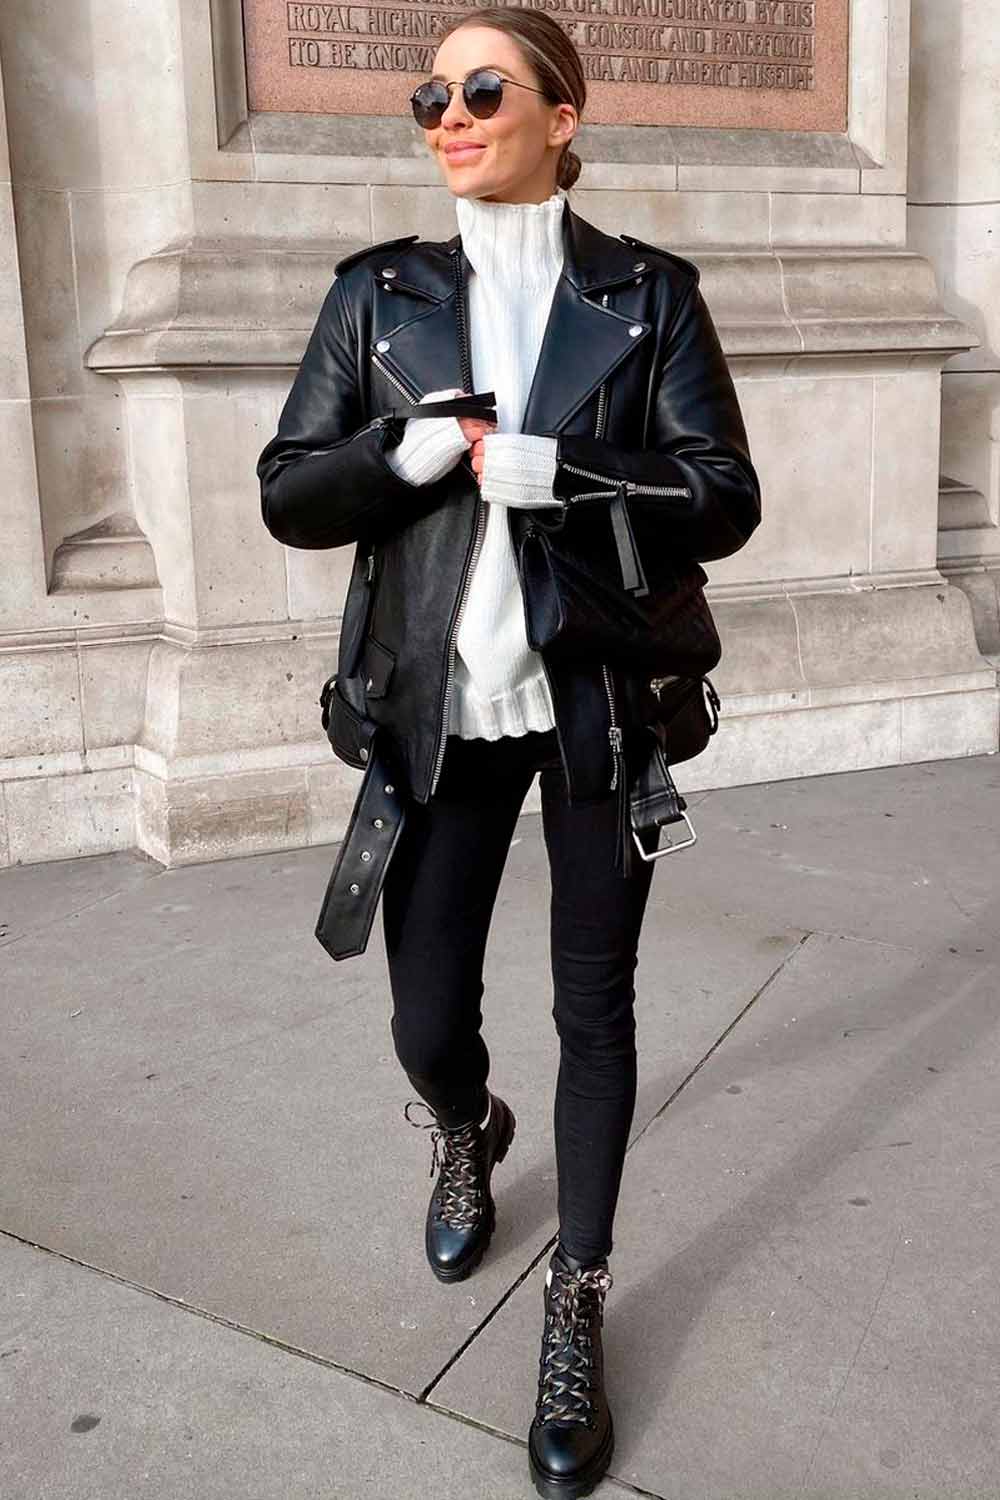 How To Rock Your School Outfit with Leather Jacket